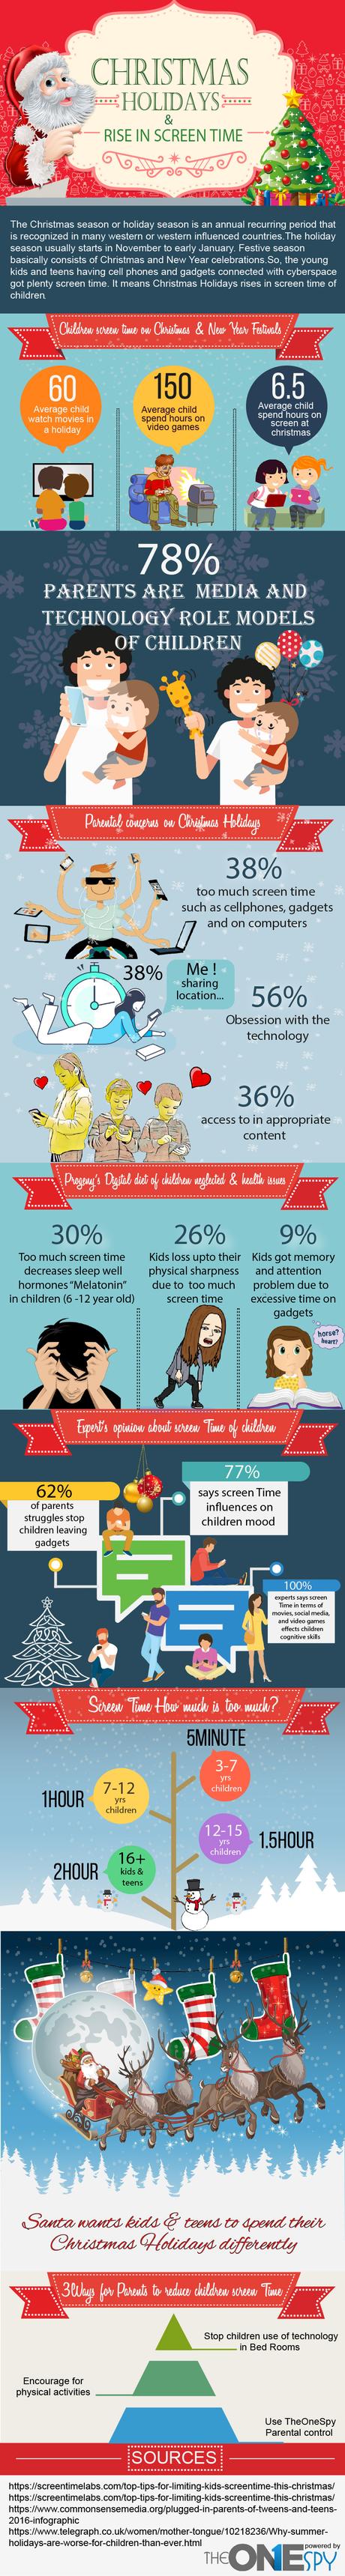 Christmas Holidays & Rise in Screen Time Infographic